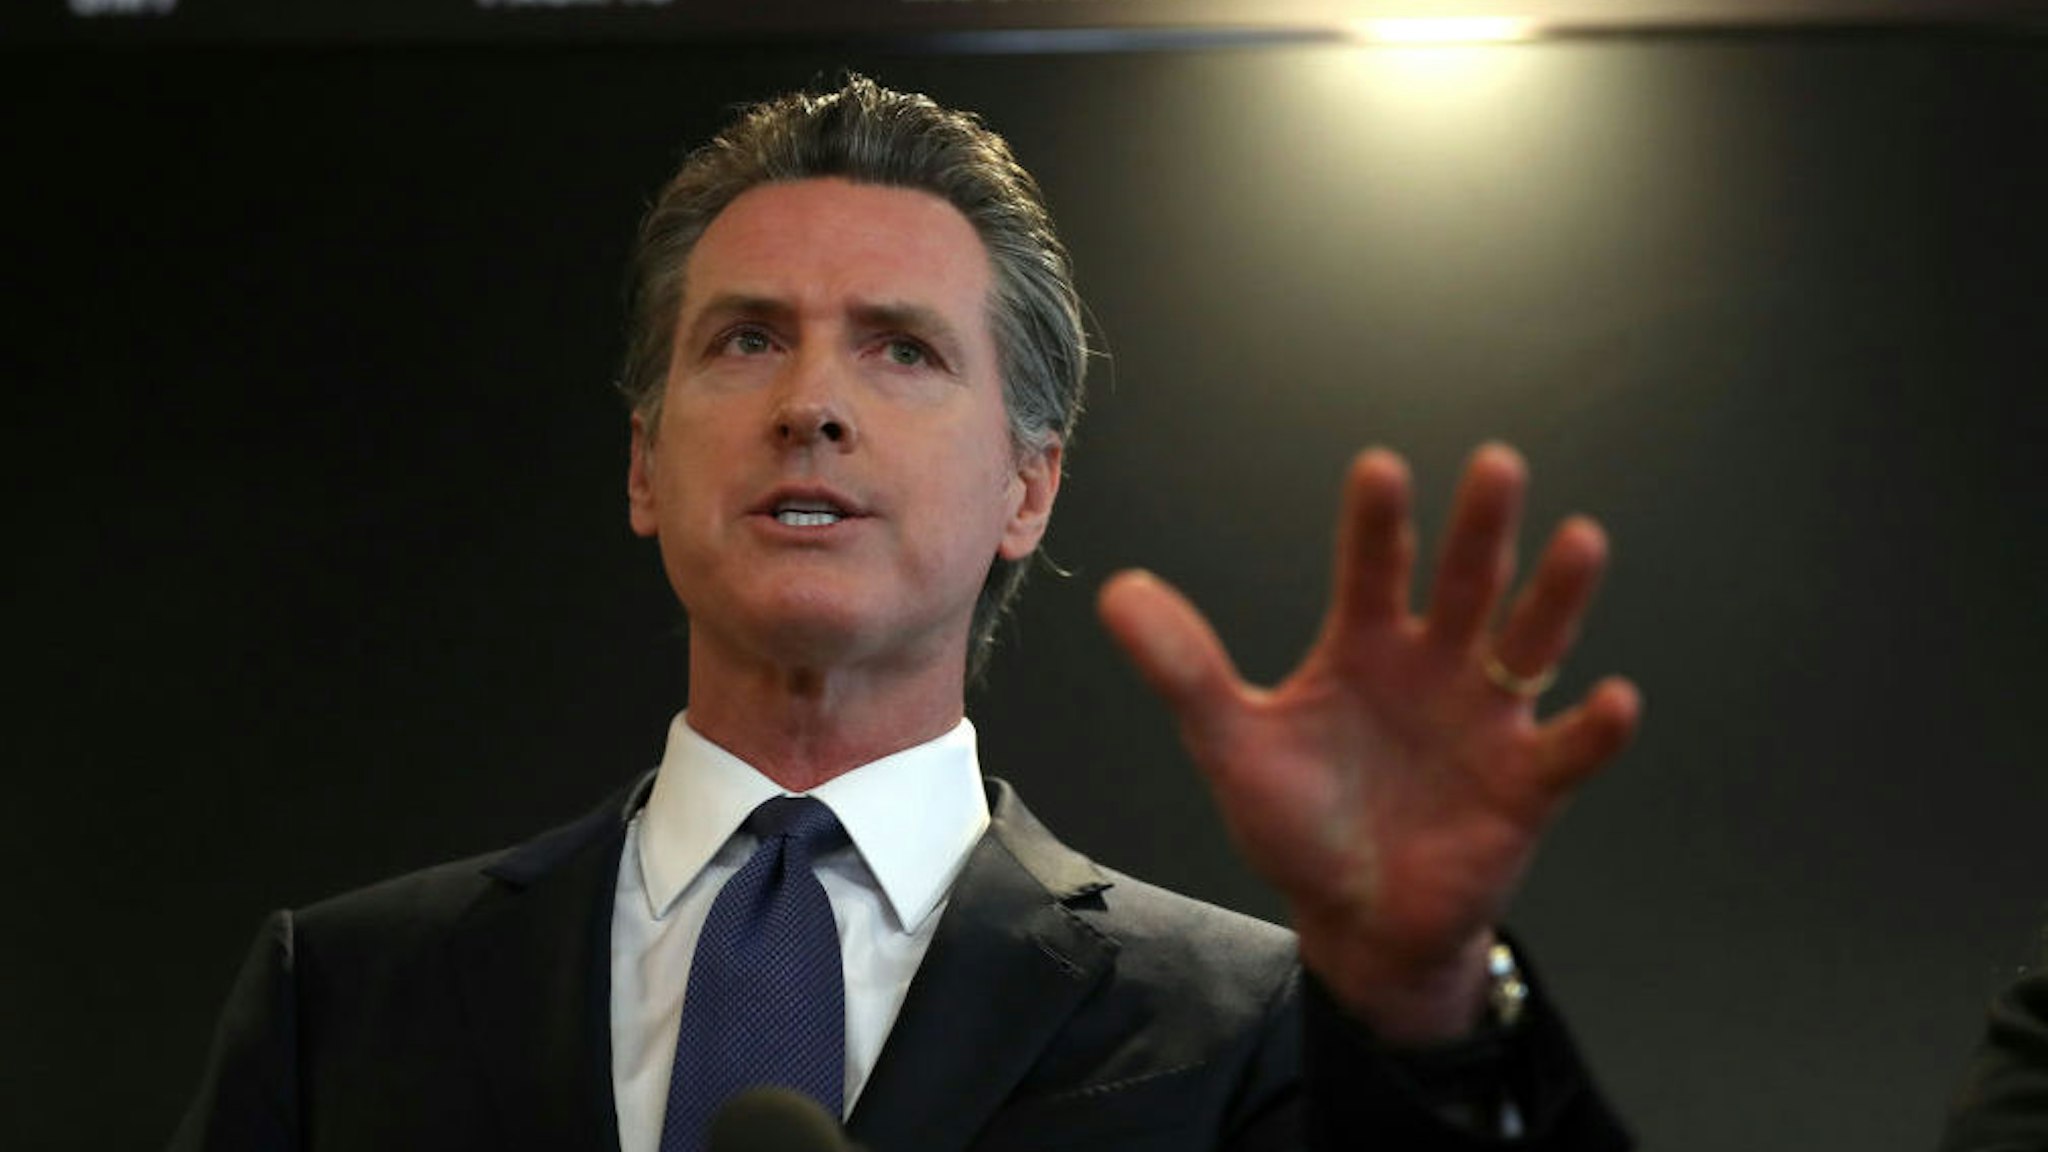 California Gov. Gavin Newsom speaks during a news conference at the California Department of Public Health on February 27, 2020 in Sacramento, California. California Gov. Gavin Newsom joined State health officials to an update to the public about the state's response to the Coronavirus known as COVID-19 a day after a possible first case of person-to-person transmission was reported in Northern California. (Photo by Justin Sullivan/Getty Images)